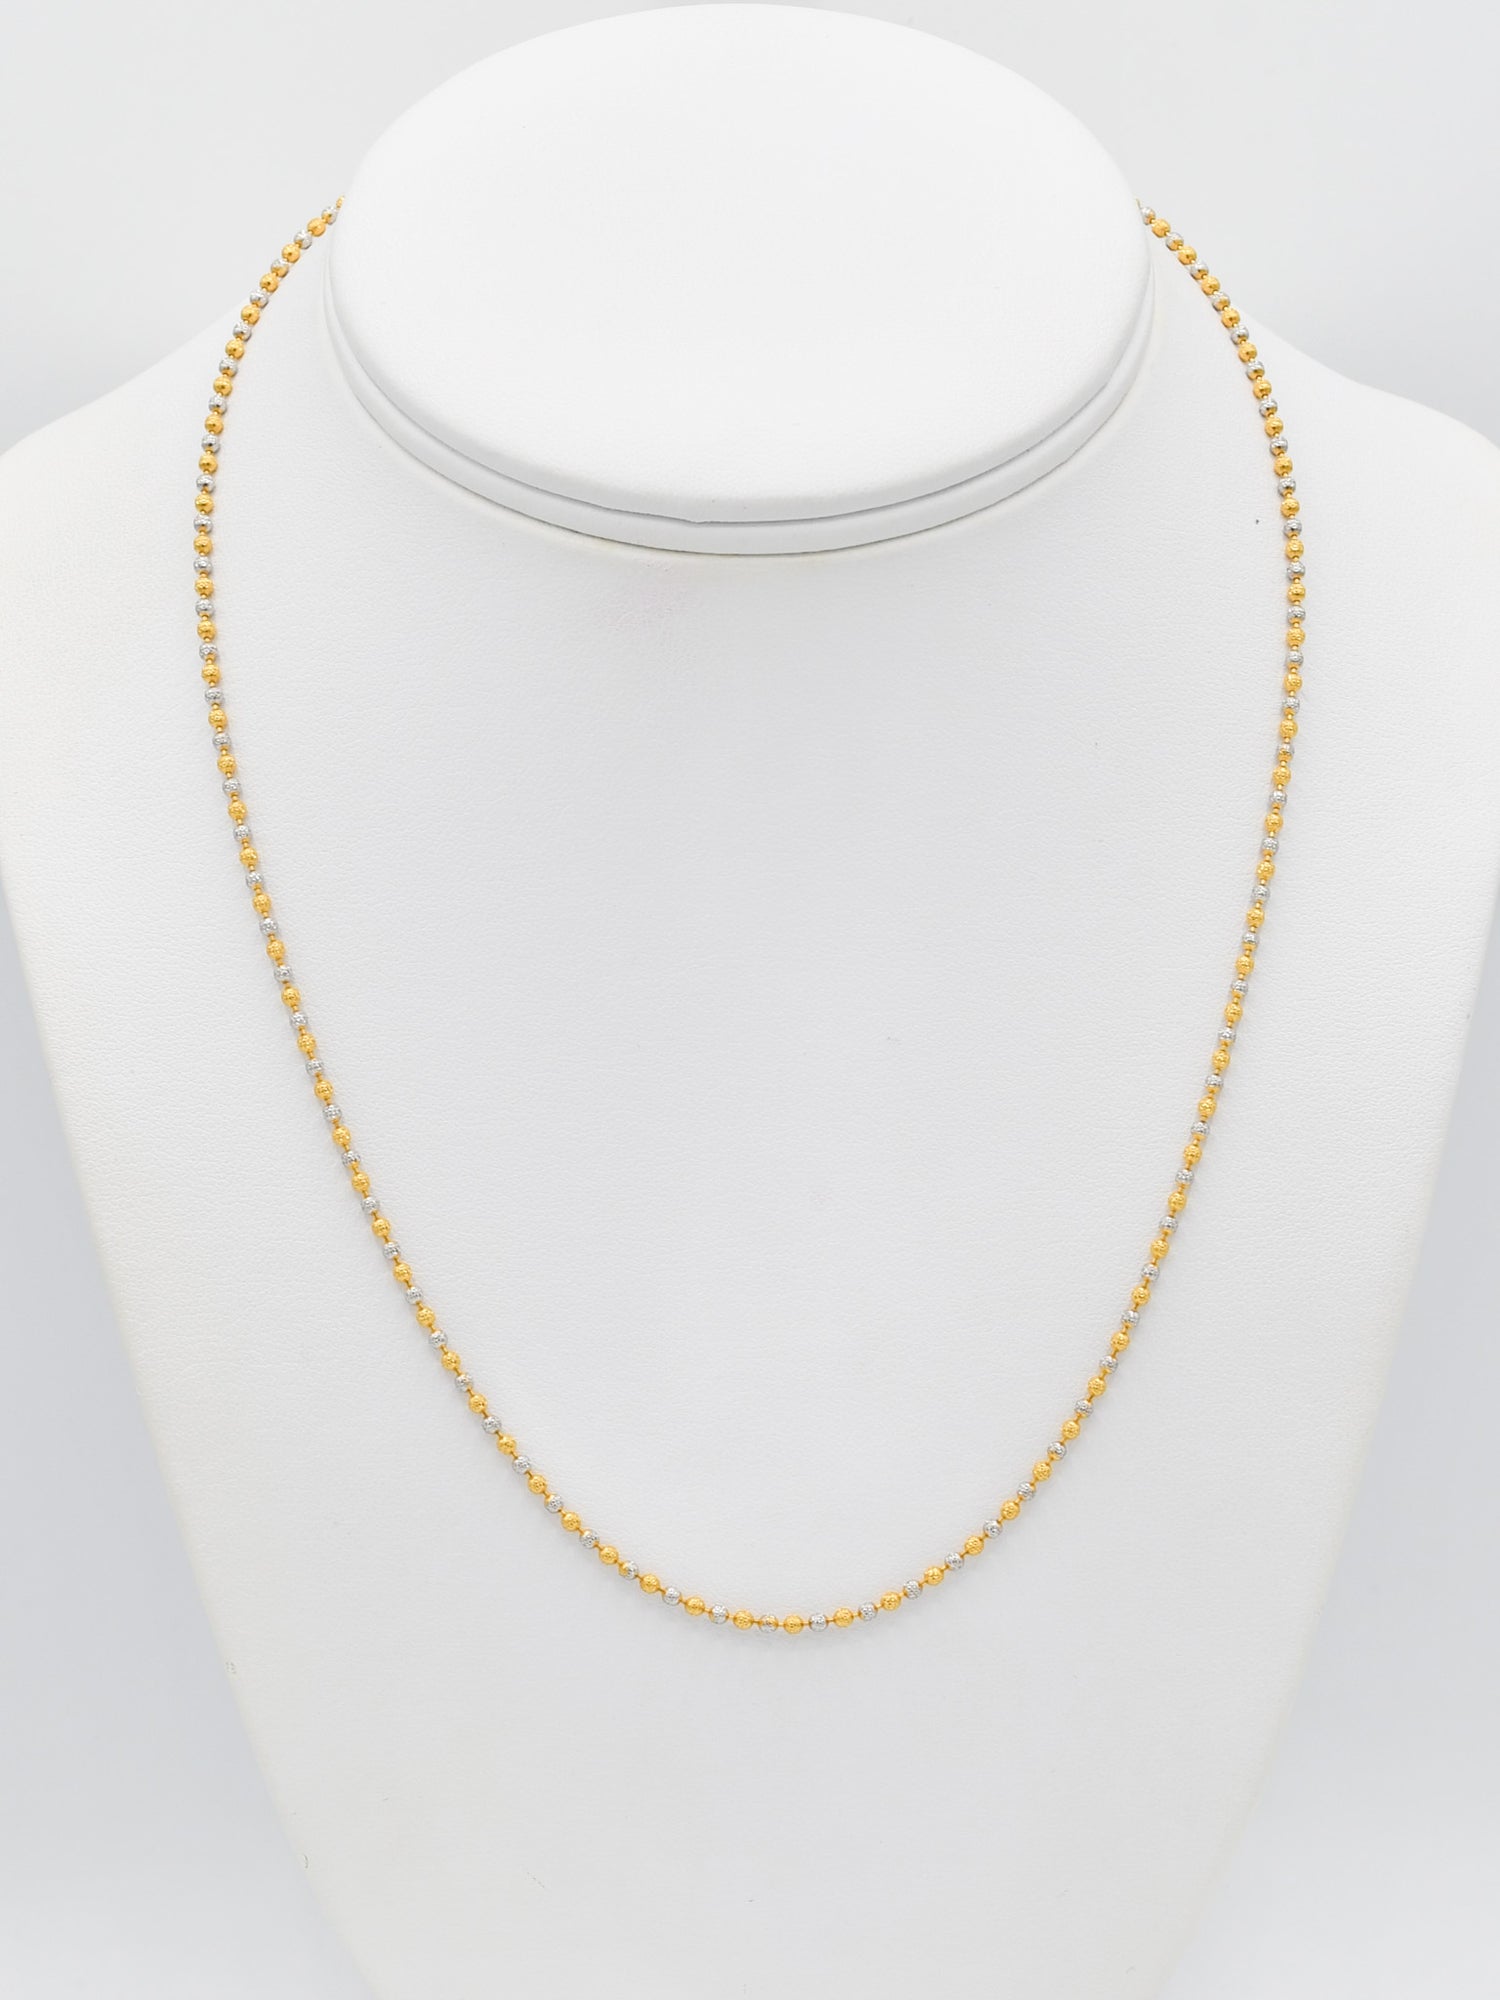 22ct Gold Two Tone Ball Chain - Roop Darshan